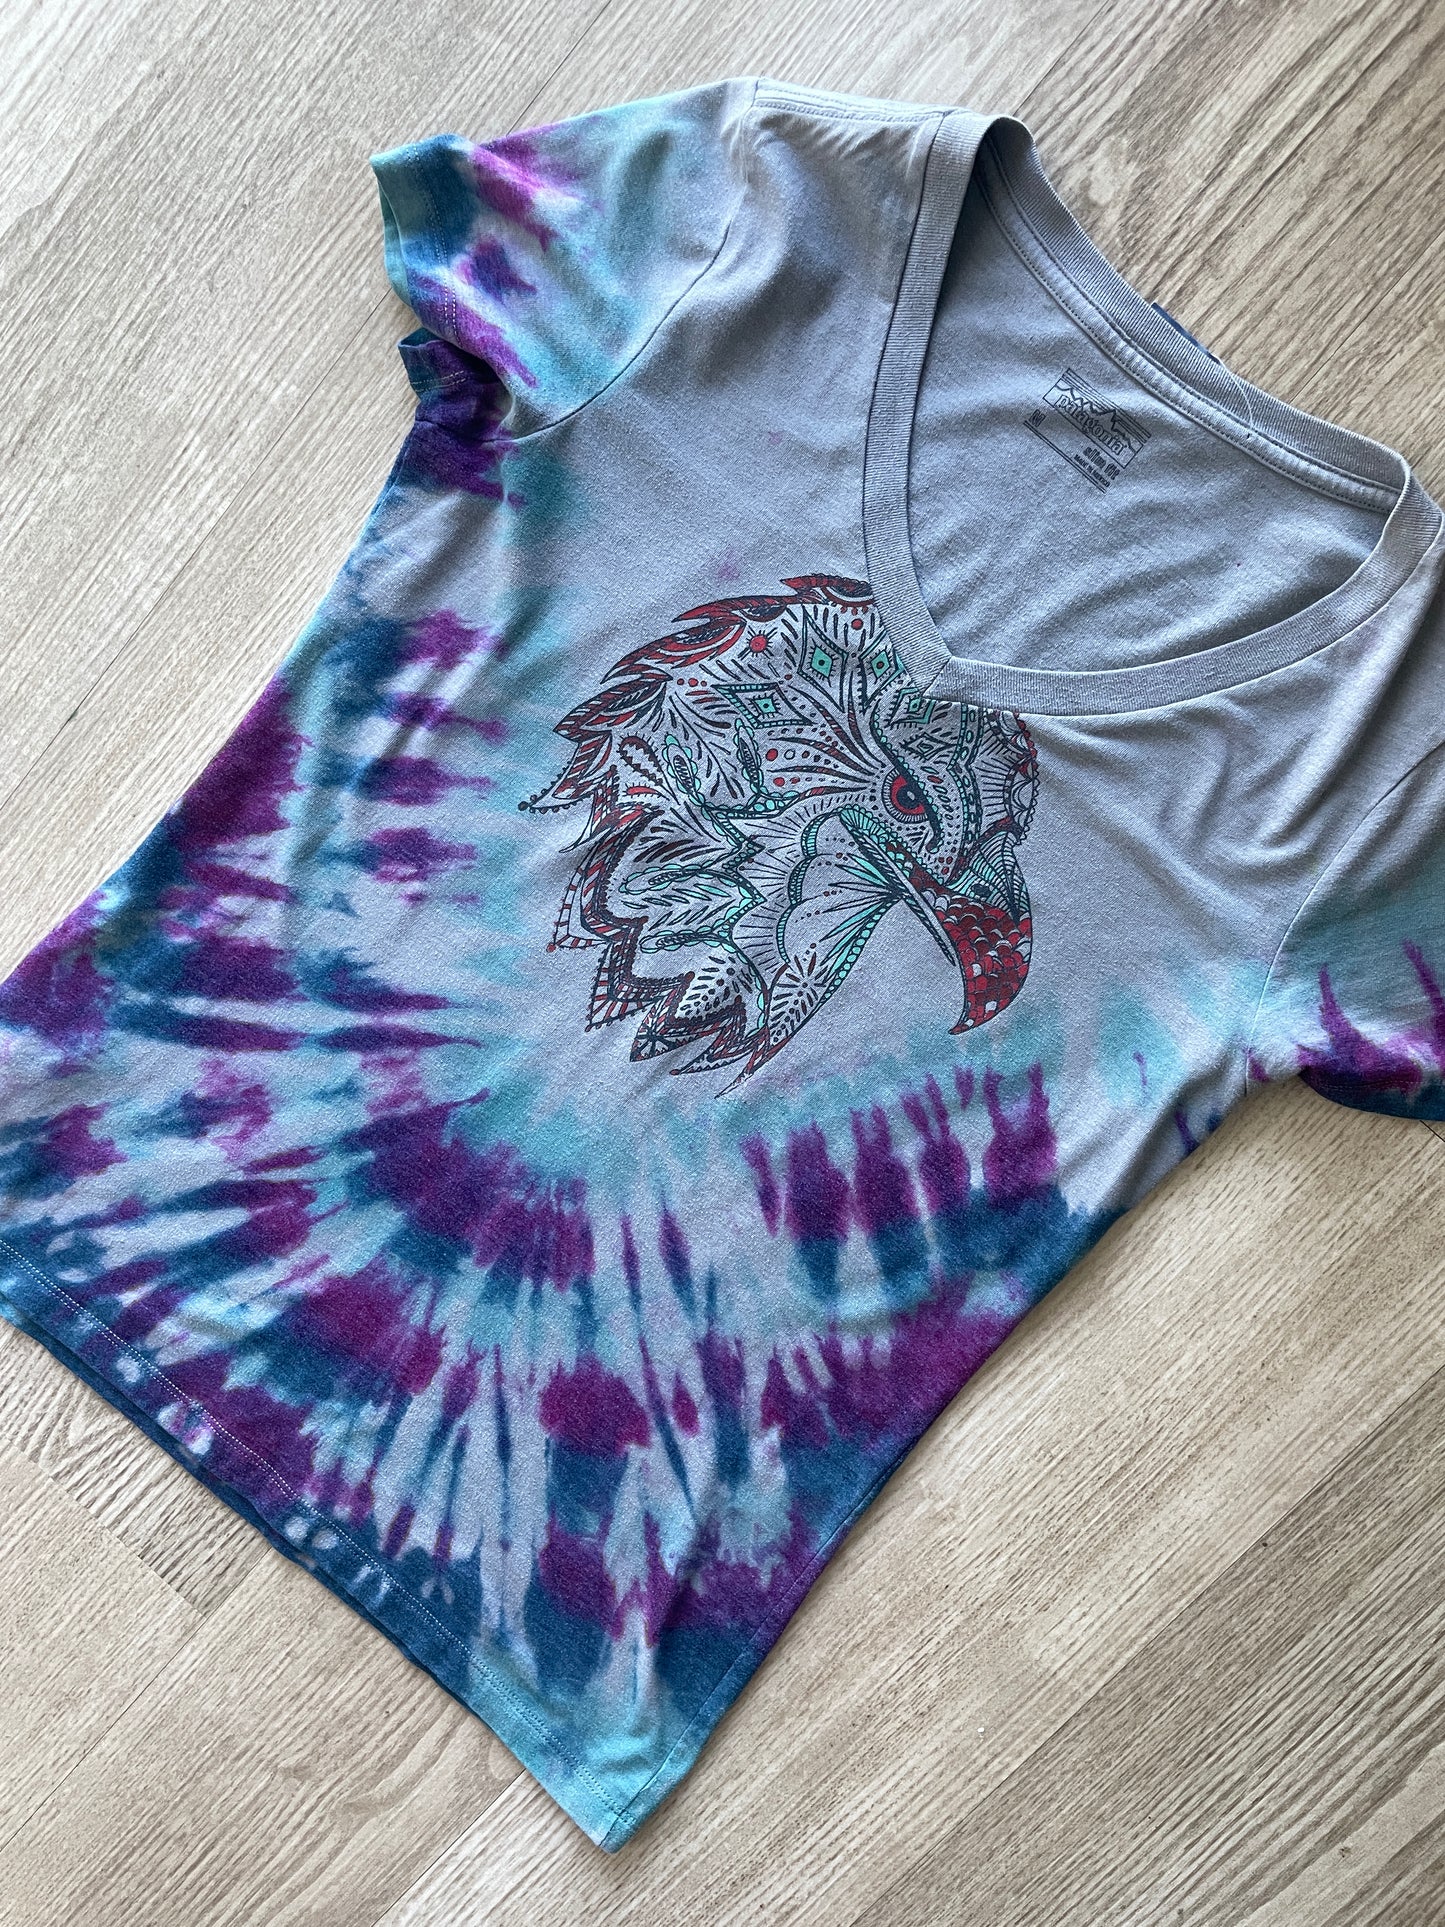 MEDIUM Women's Patagonia Eagle Handmade Tie Dye Short Sleeve V-Neck T-Shirt | One-Of-a-Kind Upcycled Blue and Green Top